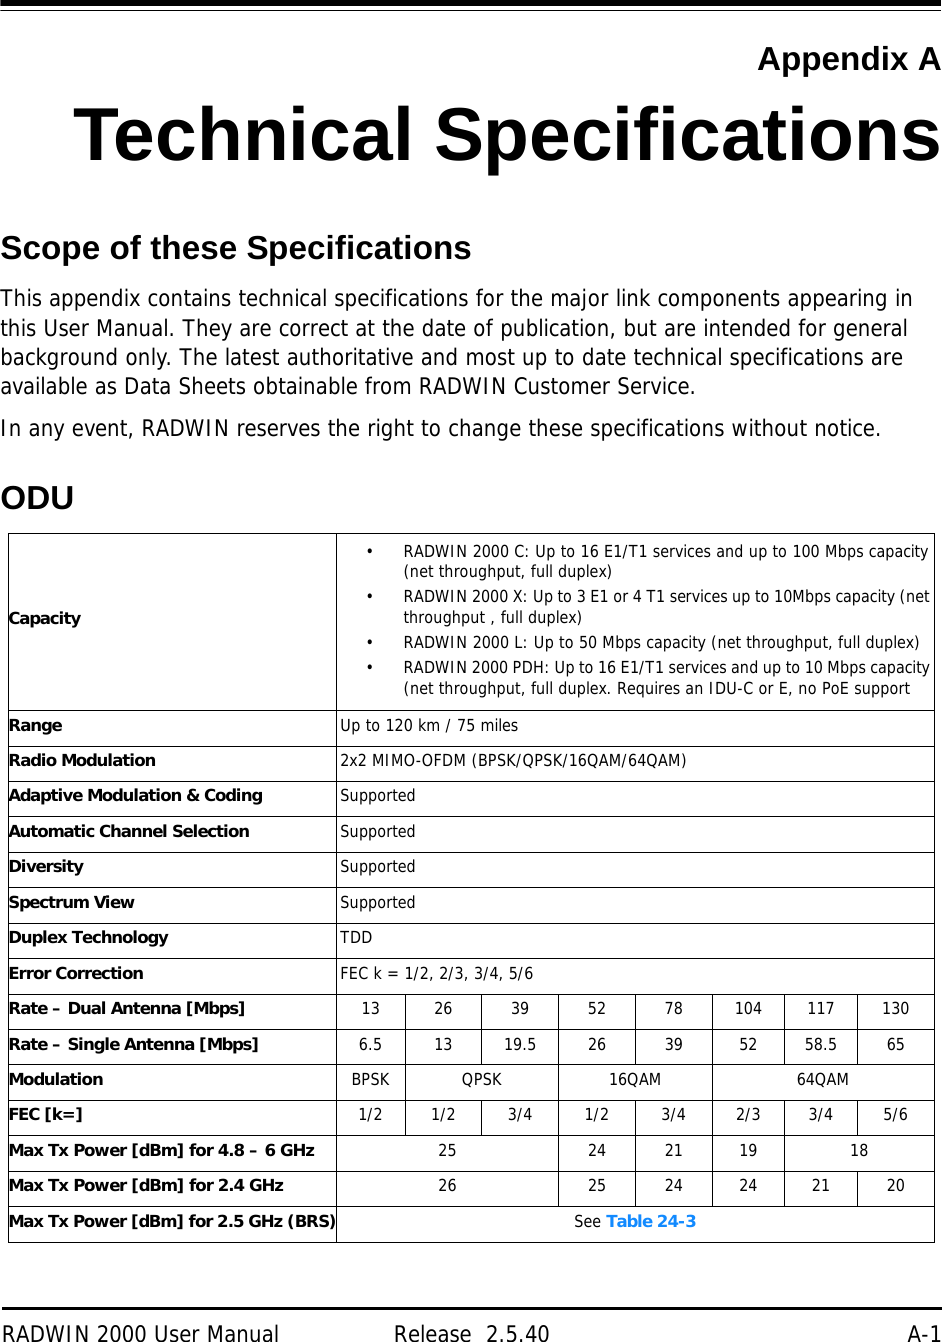 RADWIN 2000 User Manual Release  2.5.40 A-1Appendix ATechnical SpecificationsScope of these SpecificationsThis appendix contains technical specifications for the major link components appearing in this User Manual. They are correct at the date of publication, but are intended for general background only. The latest authoritative and most up to date technical specifications are available as Data Sheets obtainable from RADWIN Customer Service.In any event, RADWIN reserves the right to change these specifications without notice.ODUCapacity• RADWIN 2000 C: Up to 16 E1/T1 services and up to 100 Mbps capacity (net throughput, full duplex)• RADWIN 2000 X: Up to 3 E1 or 4 T1 services up to 10Mbps capacity (net throughput , full duplex)• RADWIN 2000 L: Up to 50 Mbps capacity (net throughput, full duplex)• RADWIN 2000 PDH: Up to 16 E1/T1 services and up to 10 Mbps capacity (net throughput, full duplex. Requires an IDU-C or E, no PoE supportRange Up to 120 km / 75 milesRadio Modulation 2x2 MIMO-OFDM (BPSK/QPSK/16QAM/64QAM)Adaptive Modulation &amp; Coding SupportedAutomatic Channel Selection SupportedDiversity SupportedSpectrum View SupportedDuplex Technology TDDError Correction FEC k = 1/2, 2/3, 3/4, 5/6Rate – Dual Antenna [Mbps] 13 26 39 52 78 104 117 130Rate – Single Antenna [Mbps] 6.5 13 19.5 26 39 52 58.5 65Modulation BPSK QPSK 16QAM 64QAMFEC [k=] 1/2 1/2 3/4 1/2 3/4 2/3 3/4 5/6Max Tx Power [dBm] for 4.8 – 6 GHz 25 24 21 19 18Max Tx Power [dBm] for 2.4 GHz 26 25 24 24 21 20Max Tx Power [dBm] for 2.5 GHz (BRS) See Table 24-3